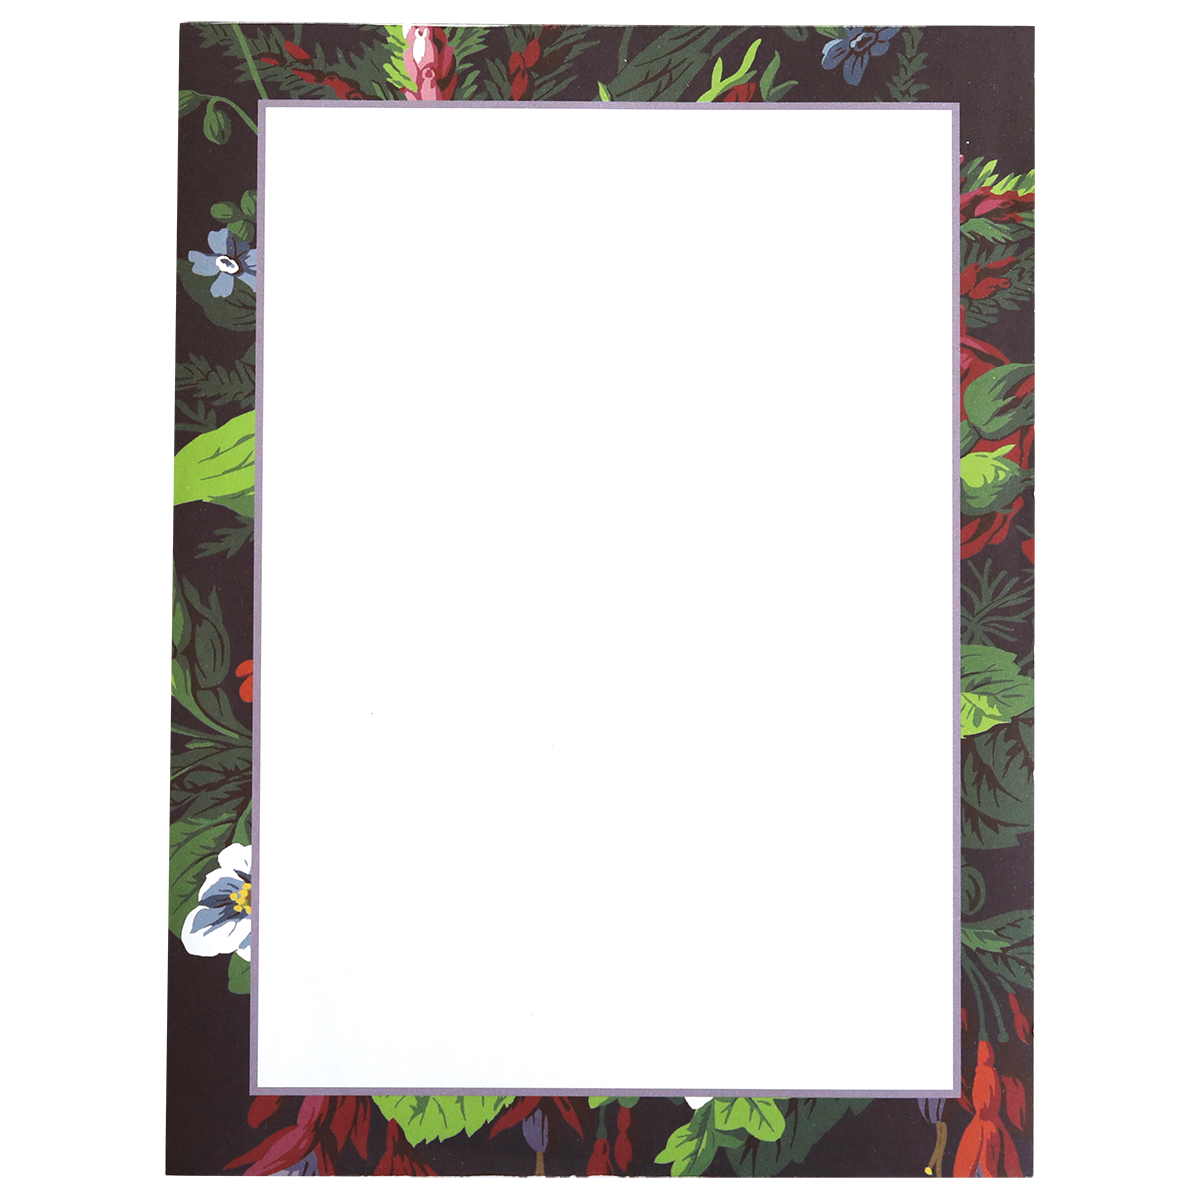 A Astrid Note Pad Set on a floral-patterned background with a size of 300 sheet note pads.